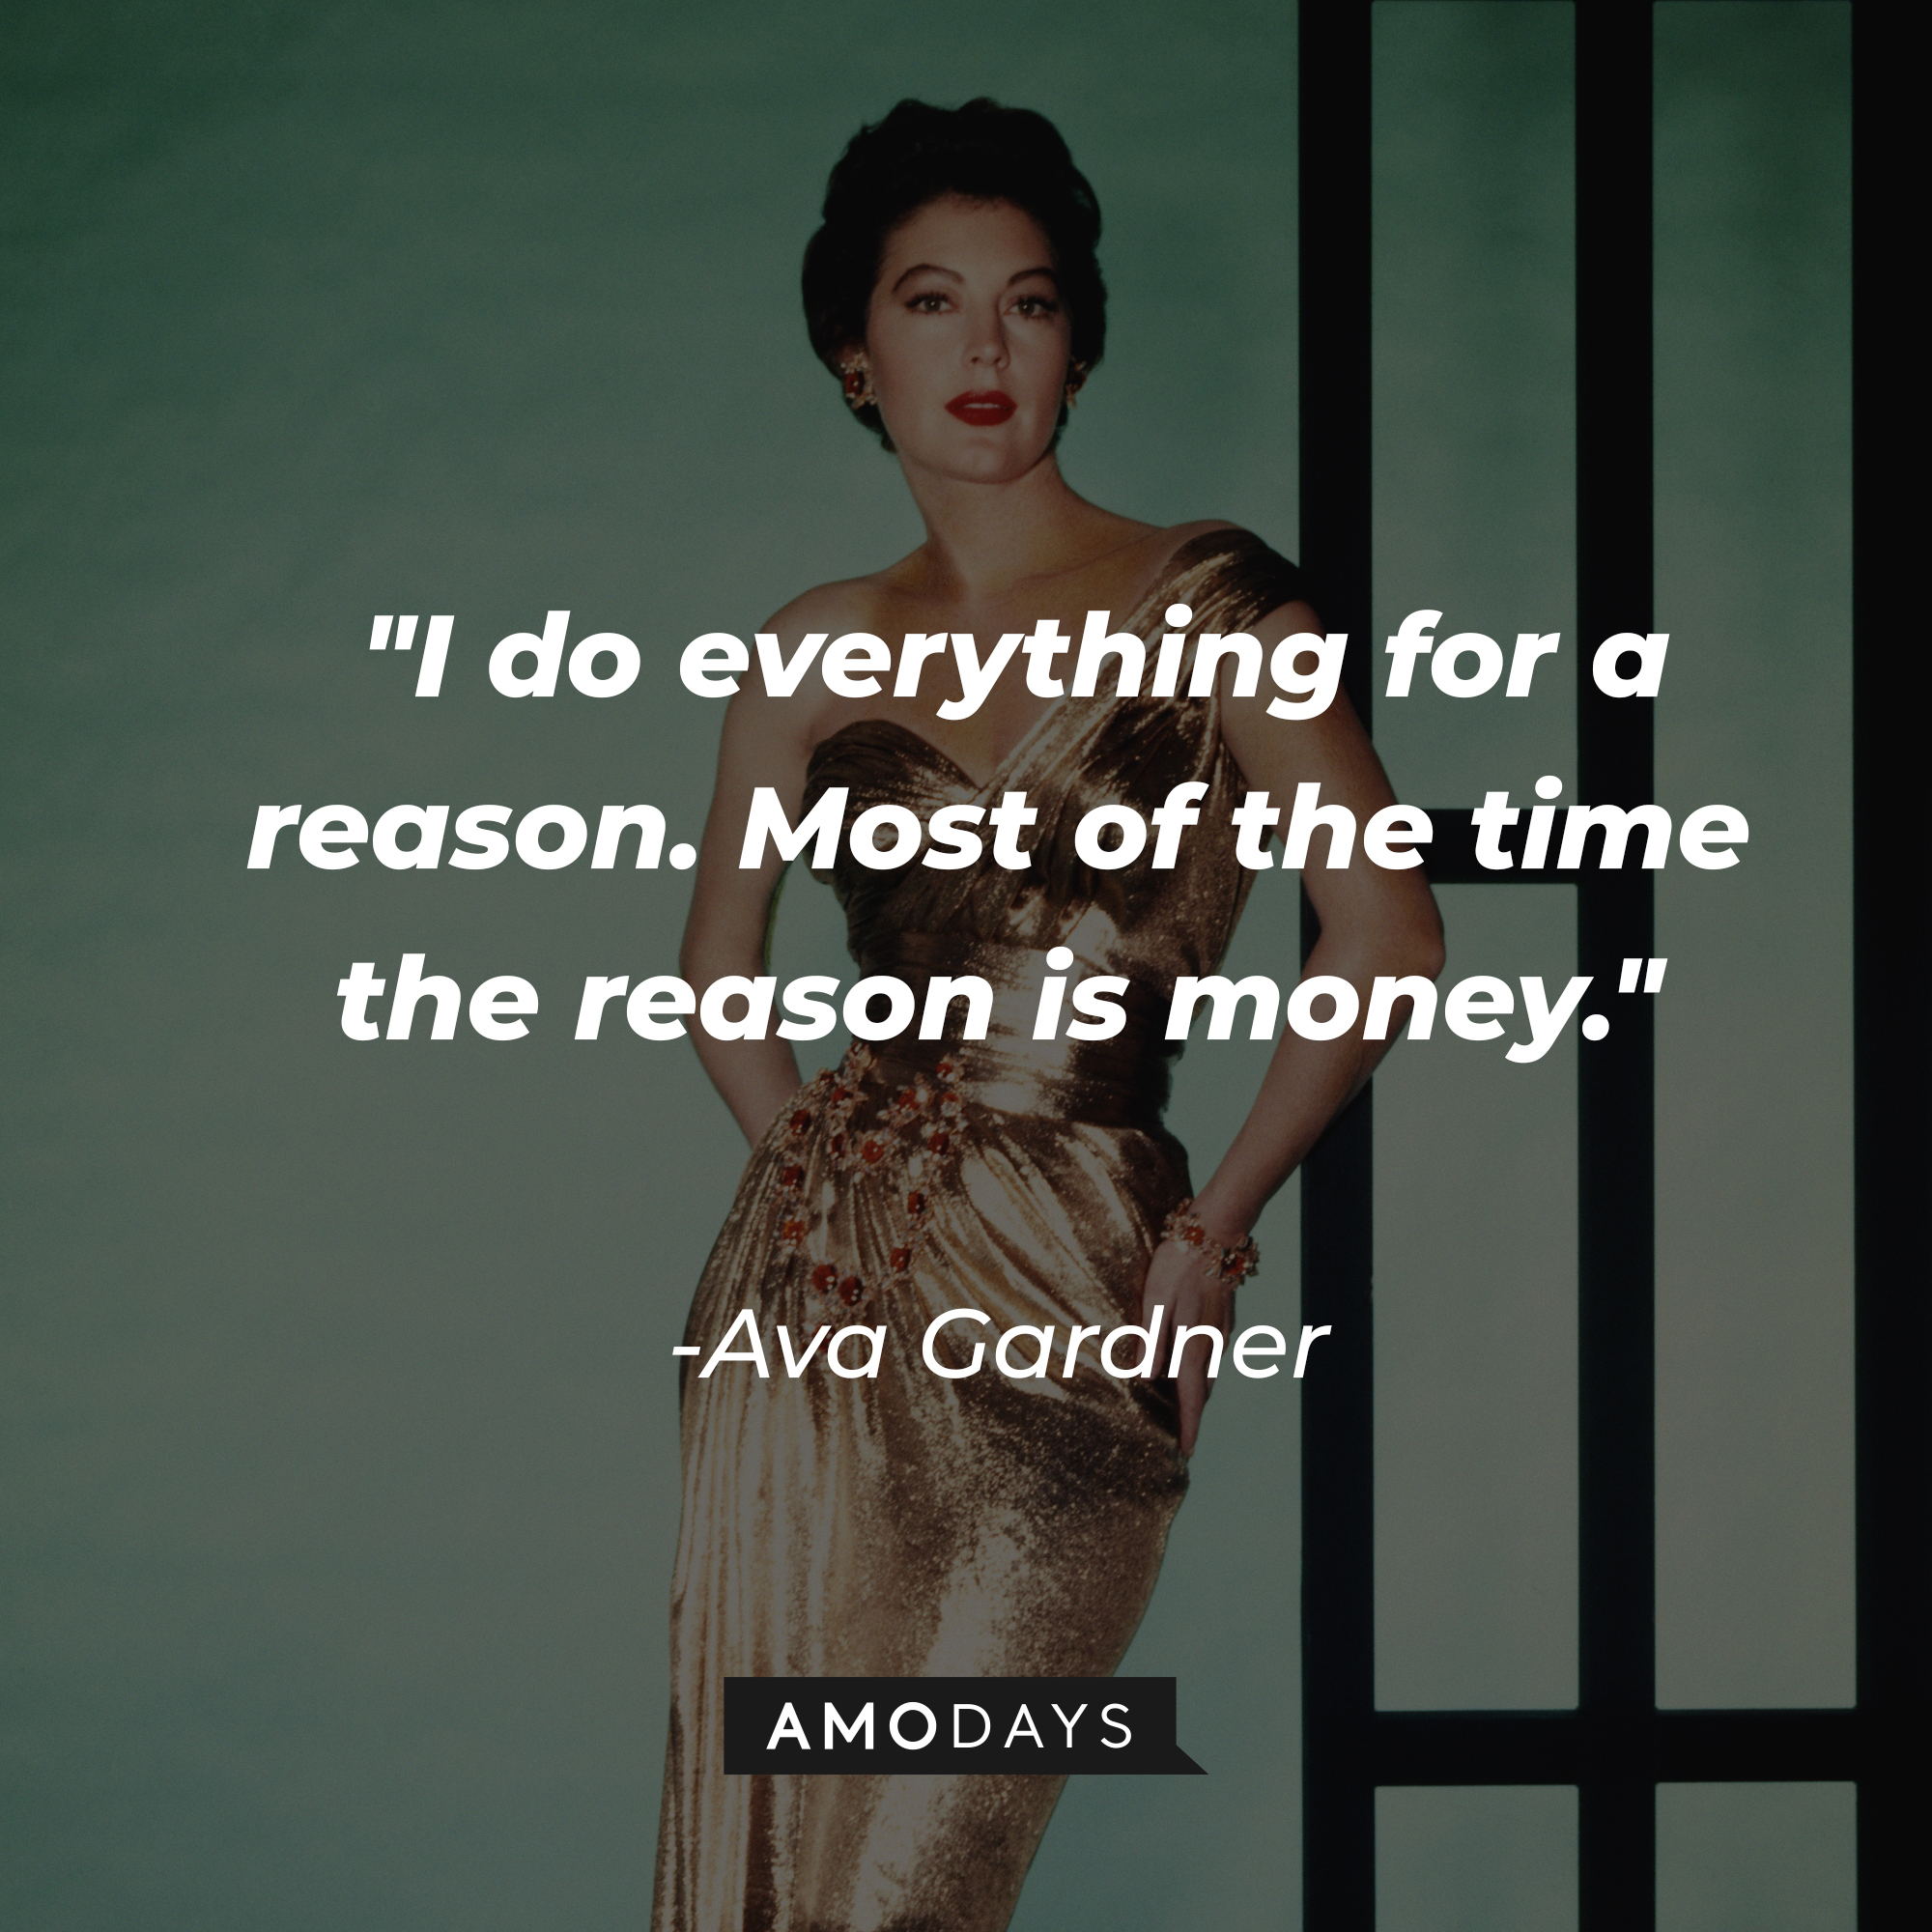 Ava Gardner with her quote: "I do everything for a reason. Most of the time the reason is money." | Source: Getty Images